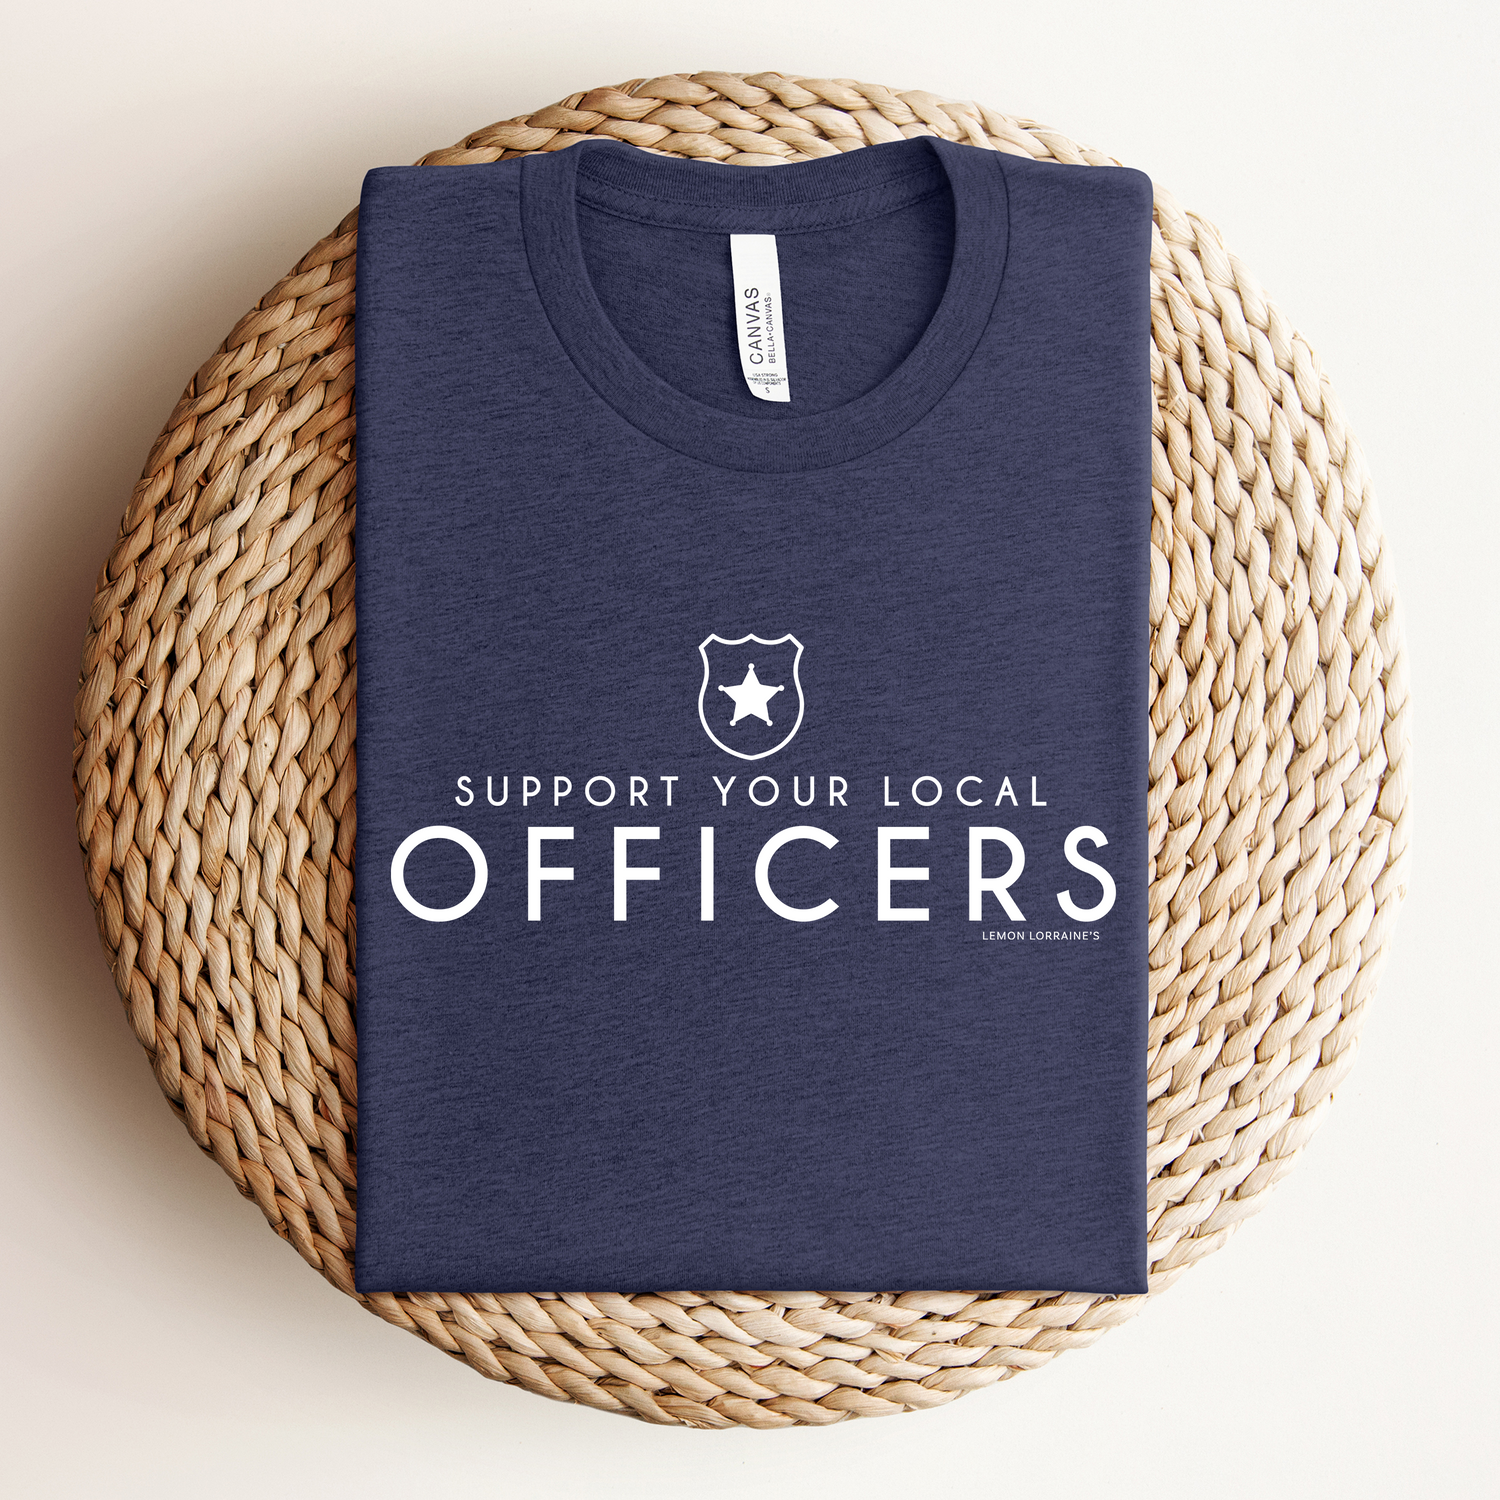 SUPPORT YOUR LOCAL OFFICERS -  Graphic Tee